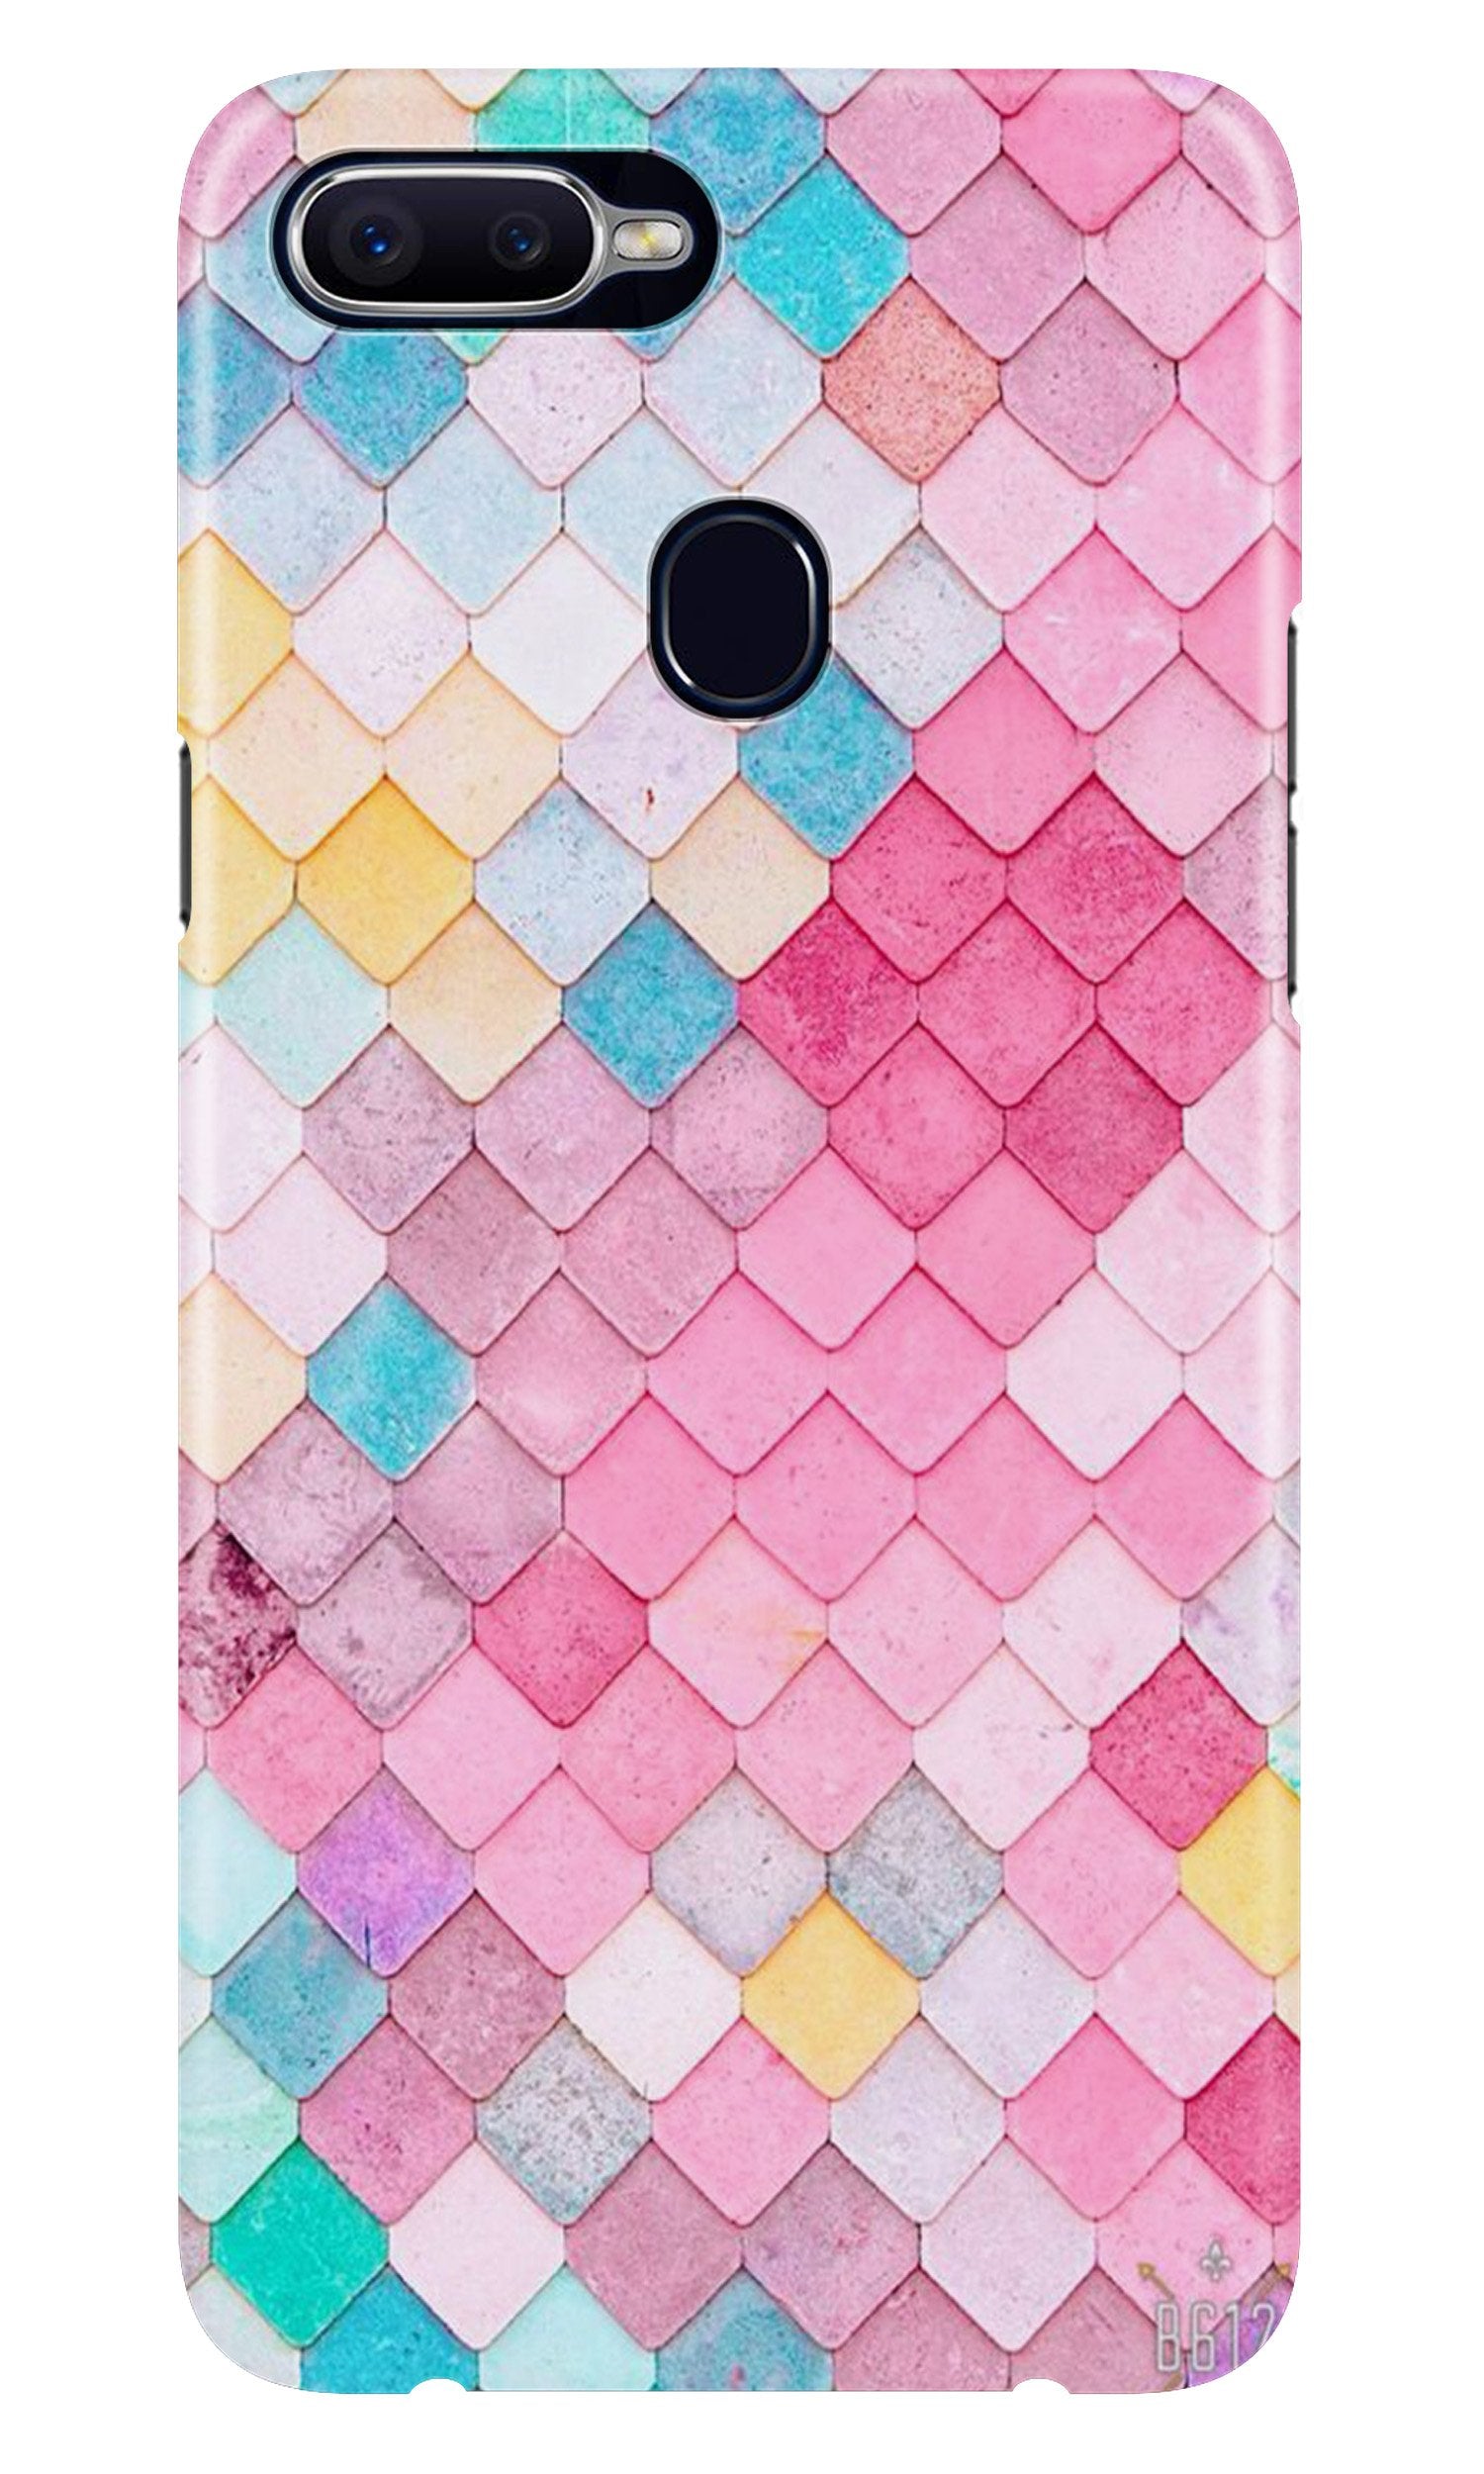 Pink Pattern Case for Oppo A7 (Design No. 215)